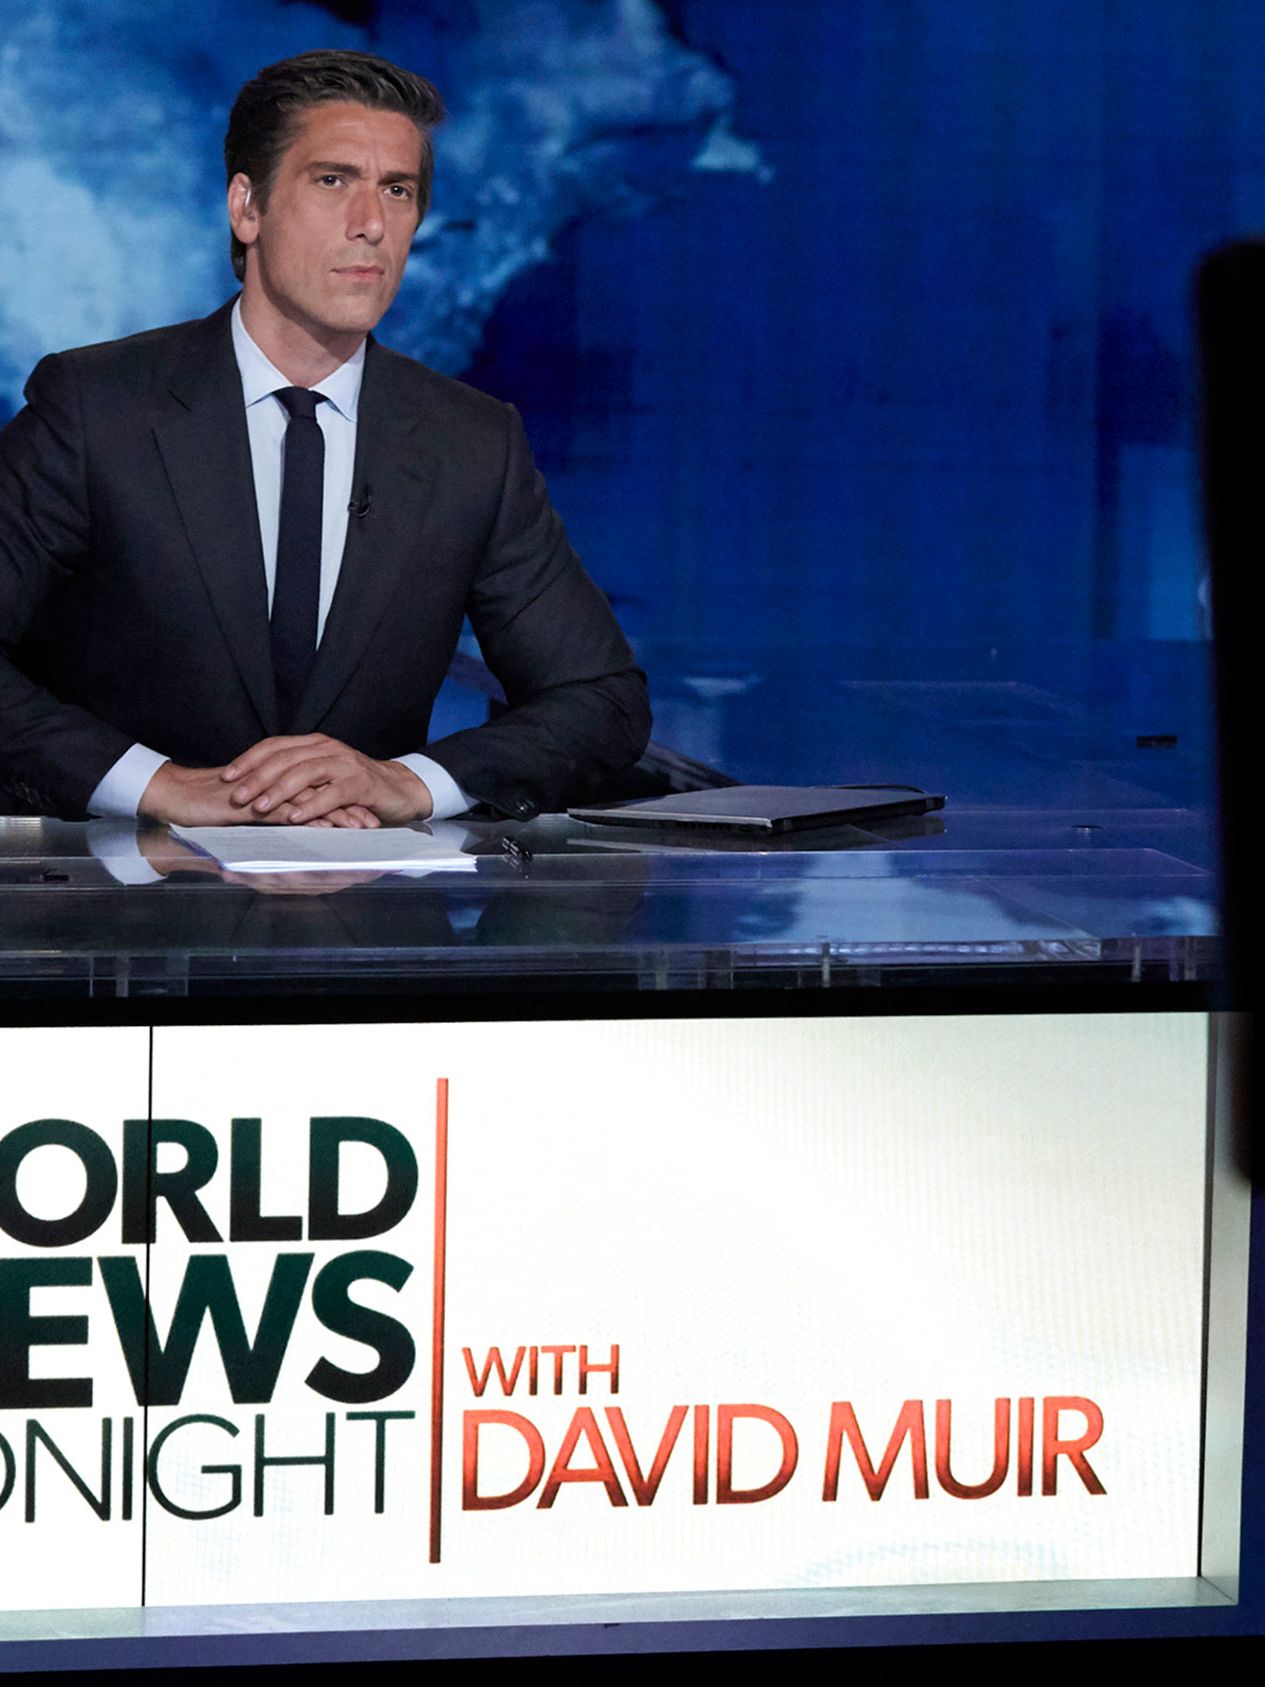 David Muir's new role at ABC News leads to drama with George Stephanopoulos  and a visit from Bob Iger | CNN Business